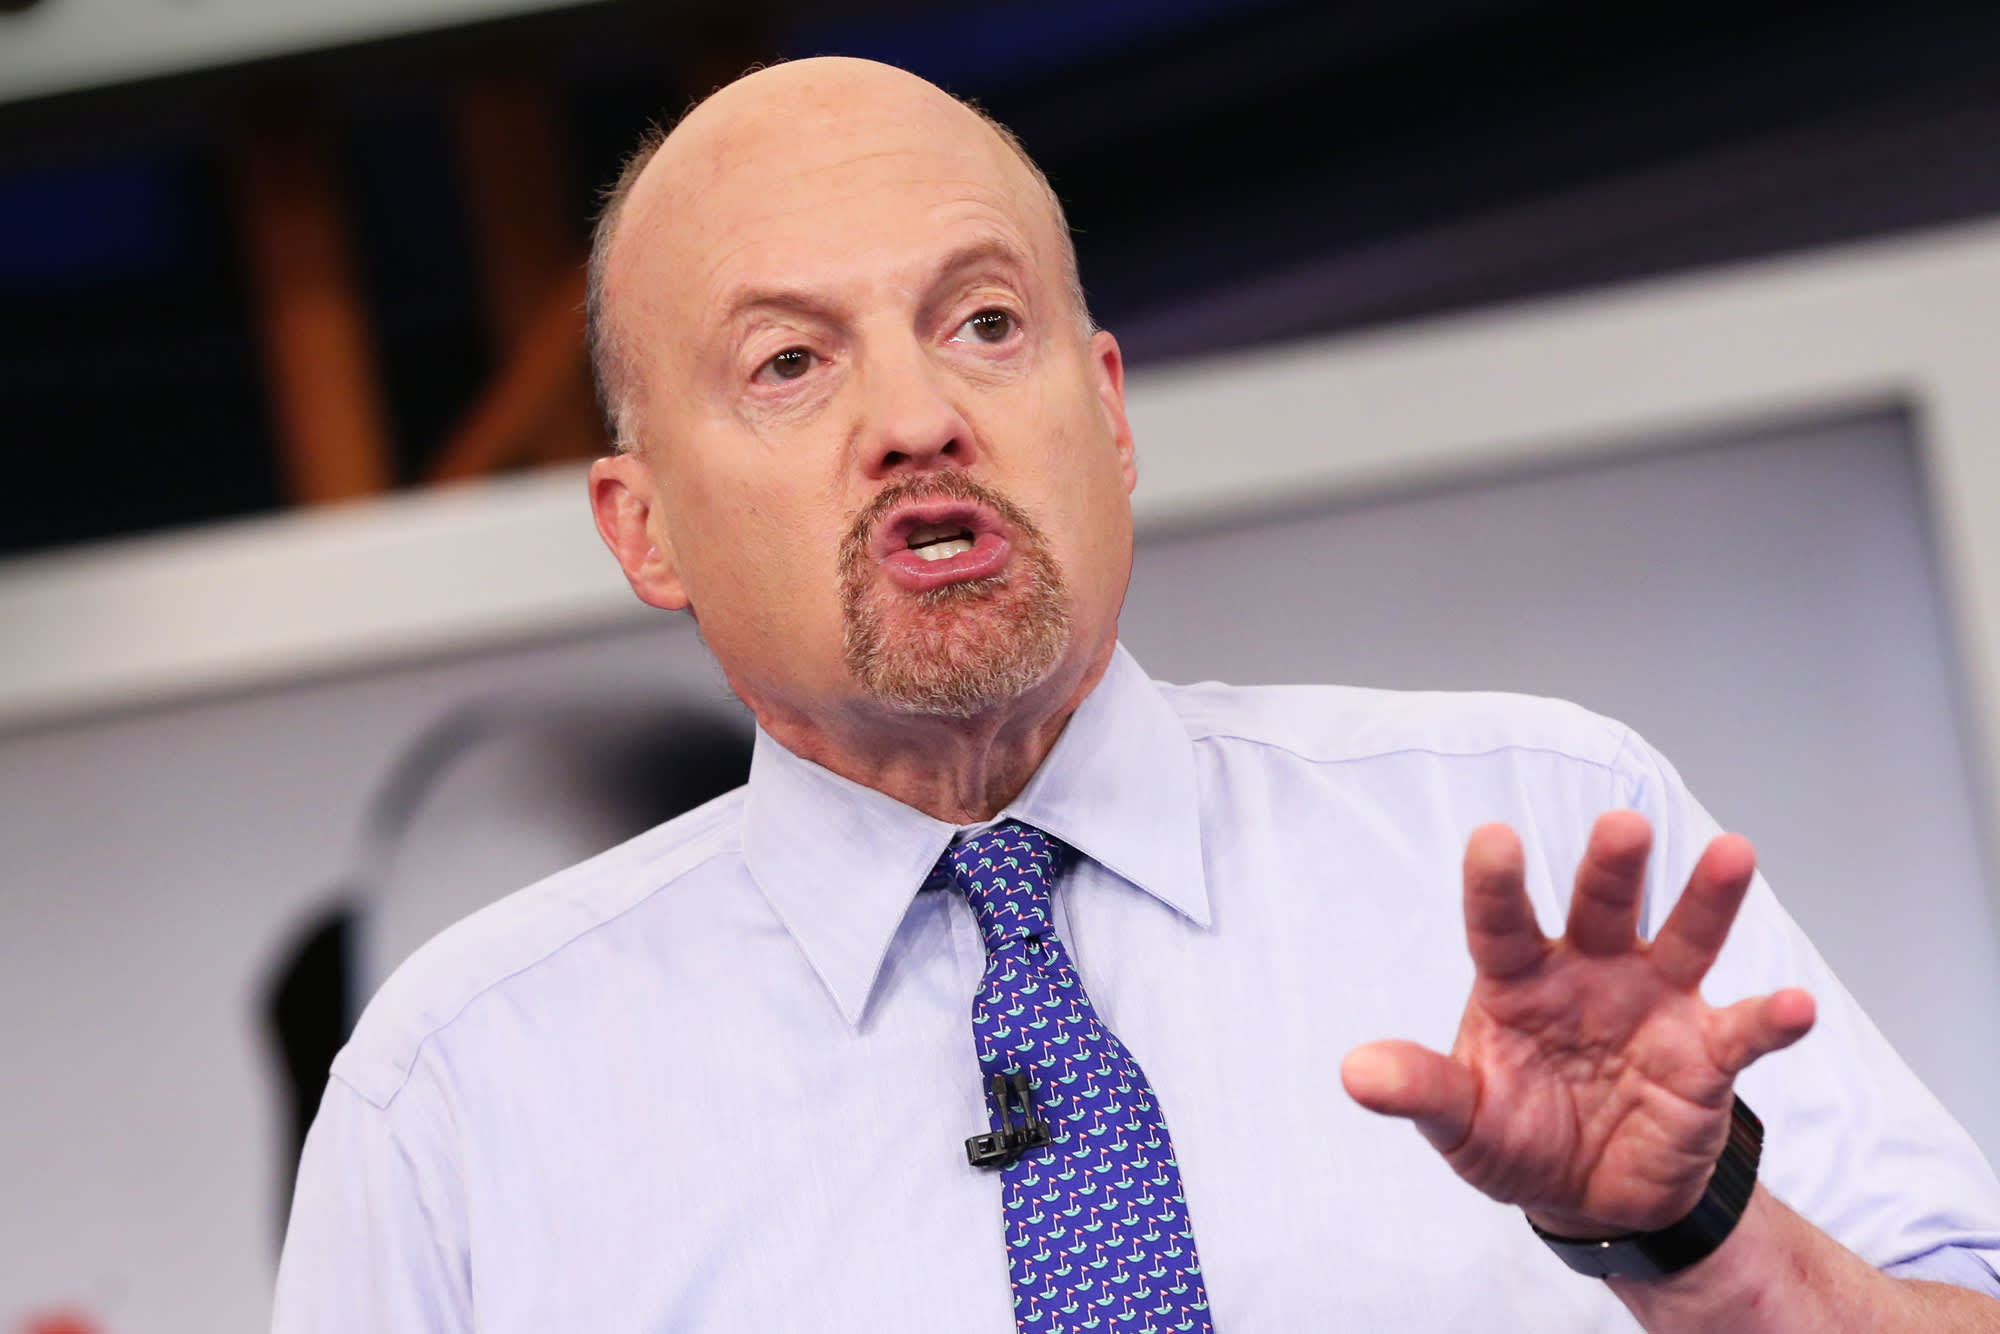 Jim Cramer says the market will not bottom until it sees a ‘booming’ moment